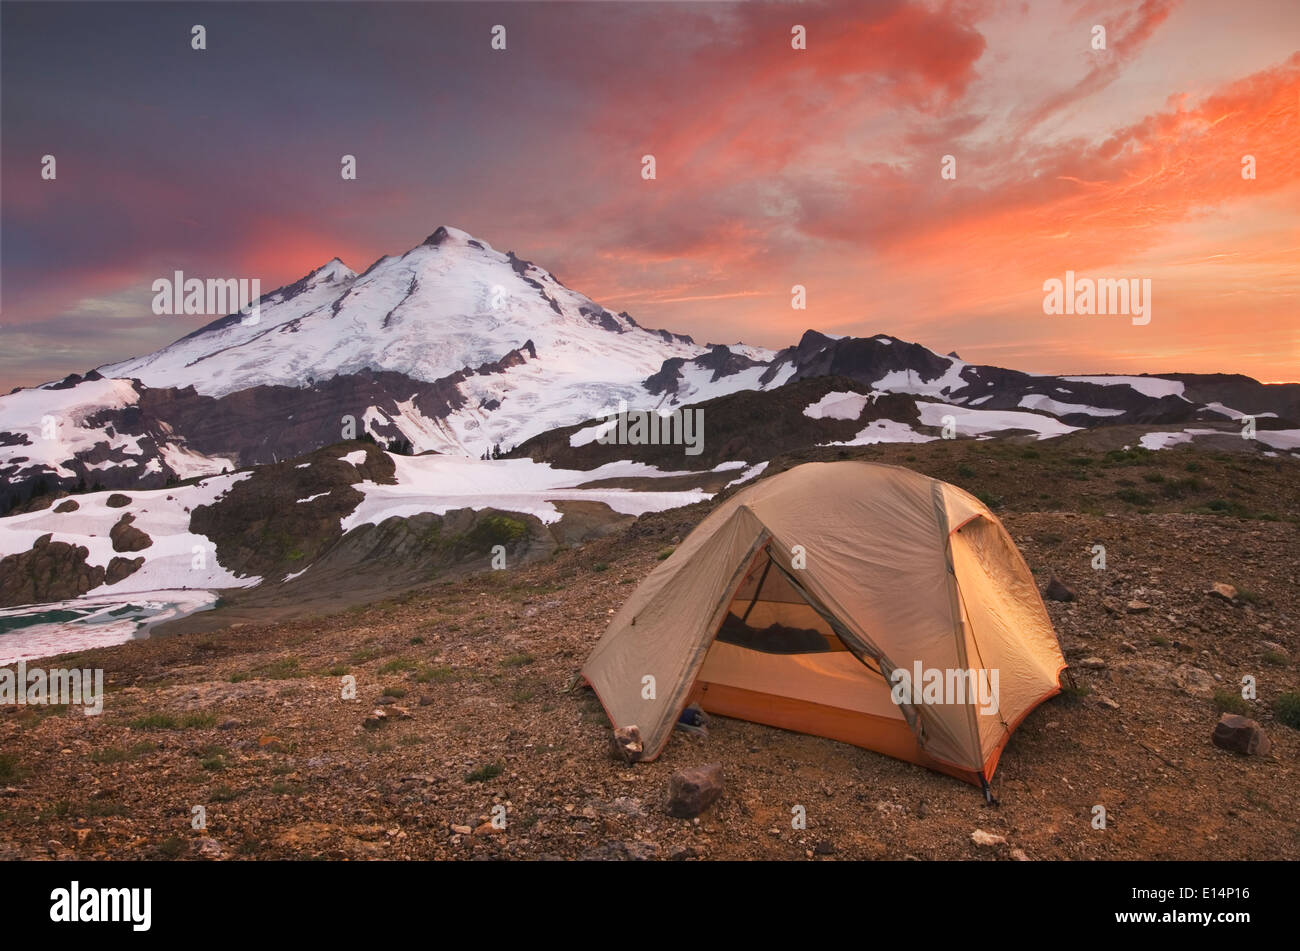 Tent at campsite in snowy mountain landscape Stock Photo